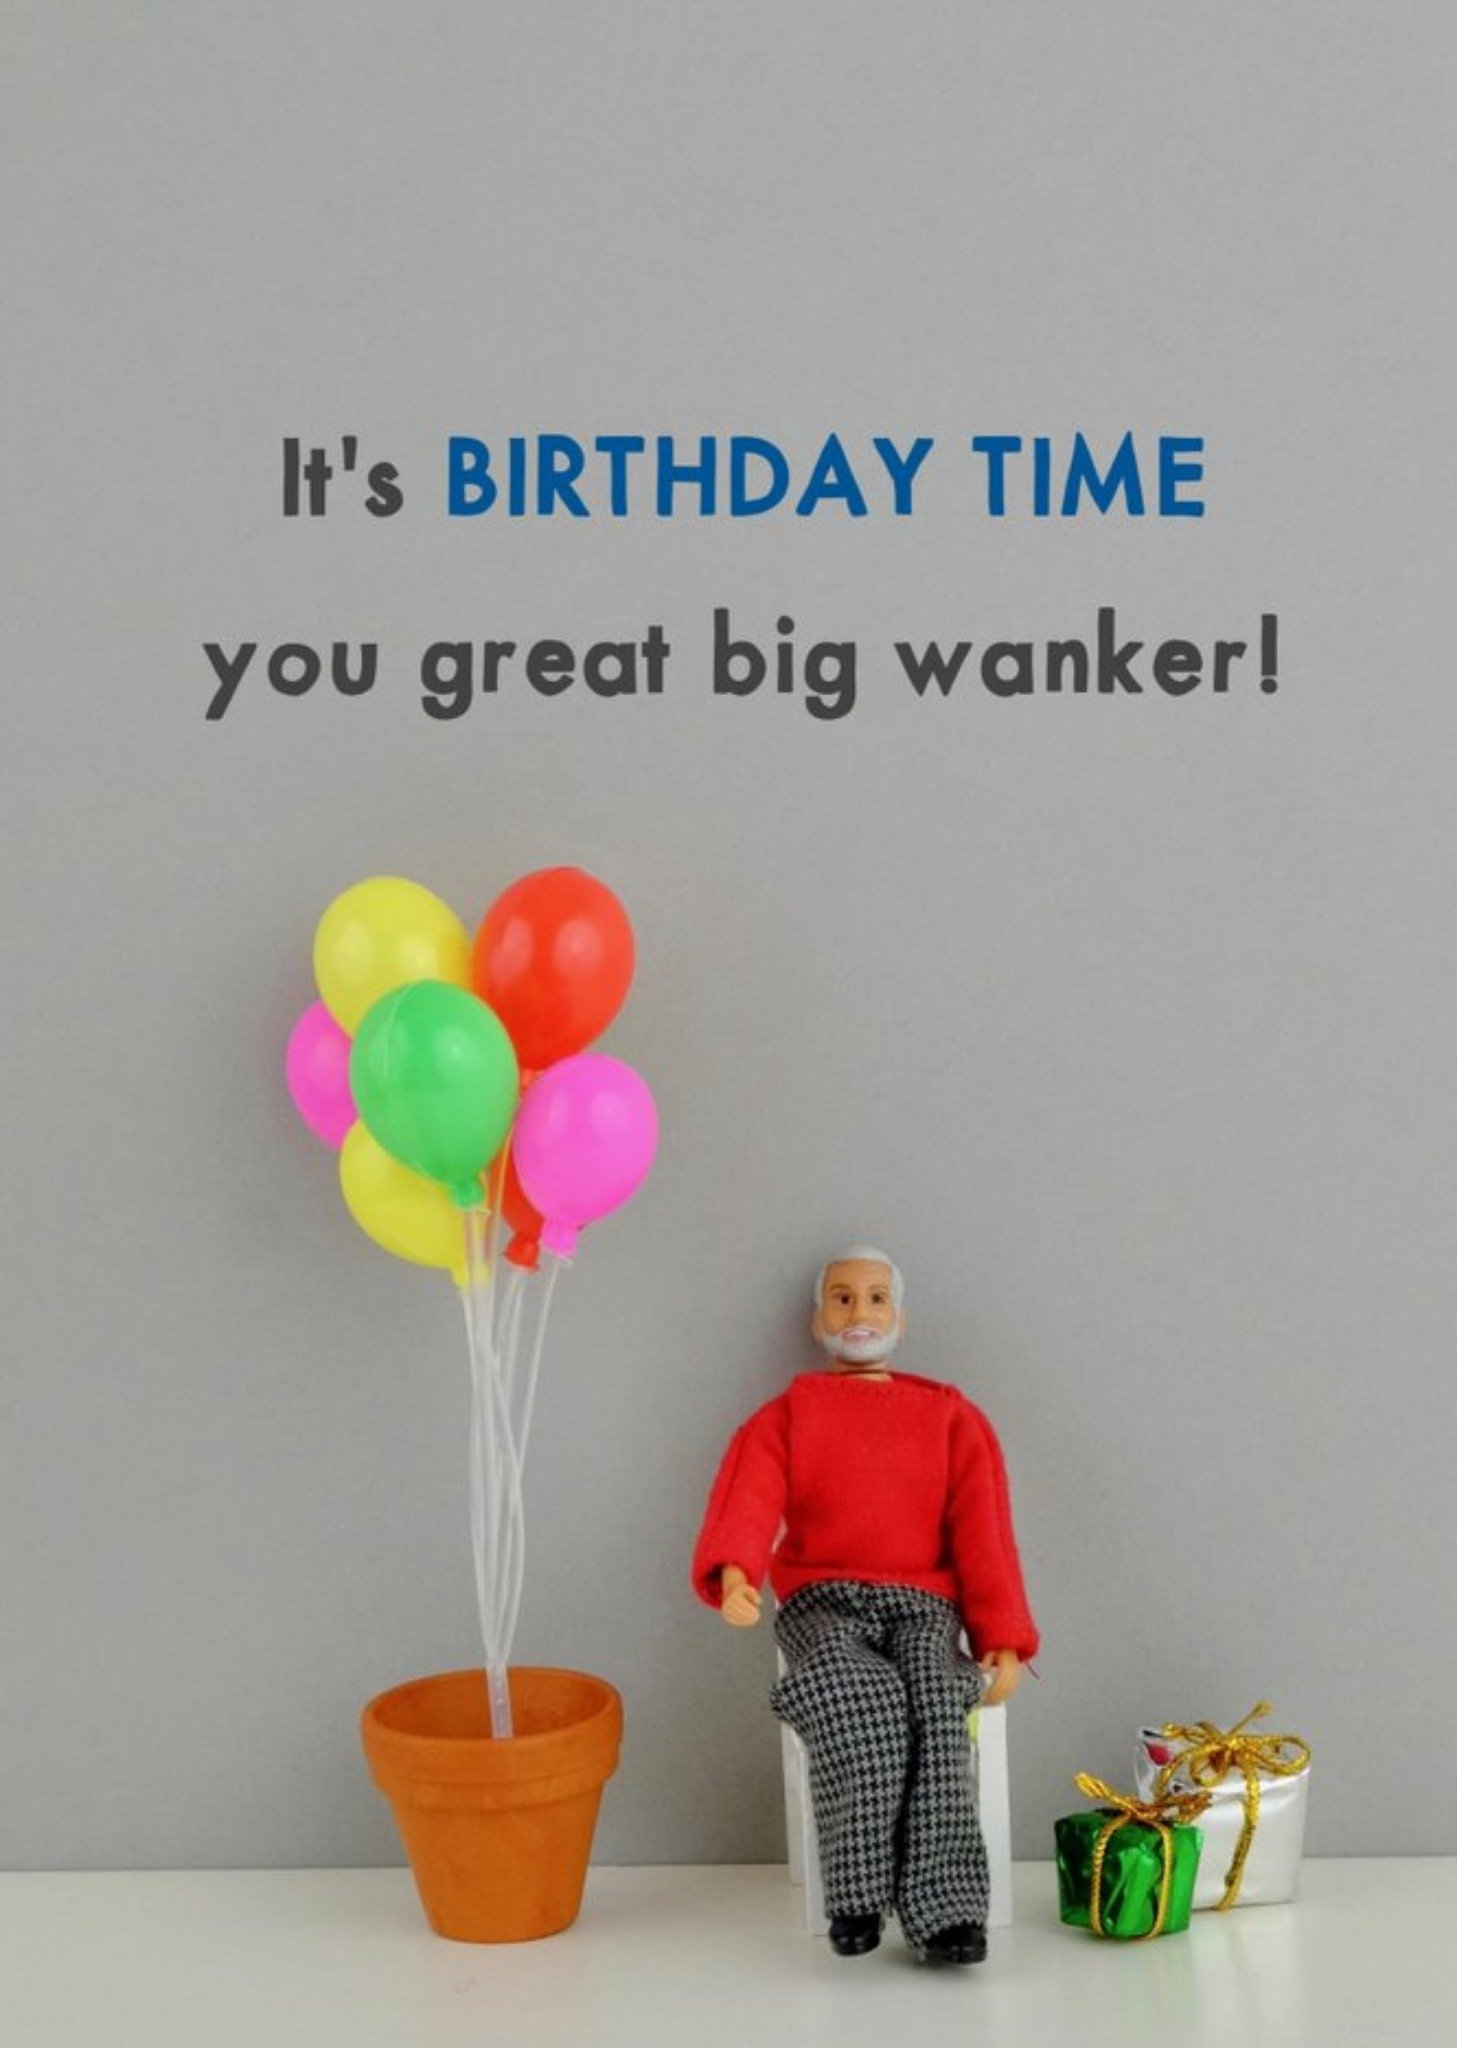 Bold And Bright Funny Dolls It's Birthday Time Rude Card, Large